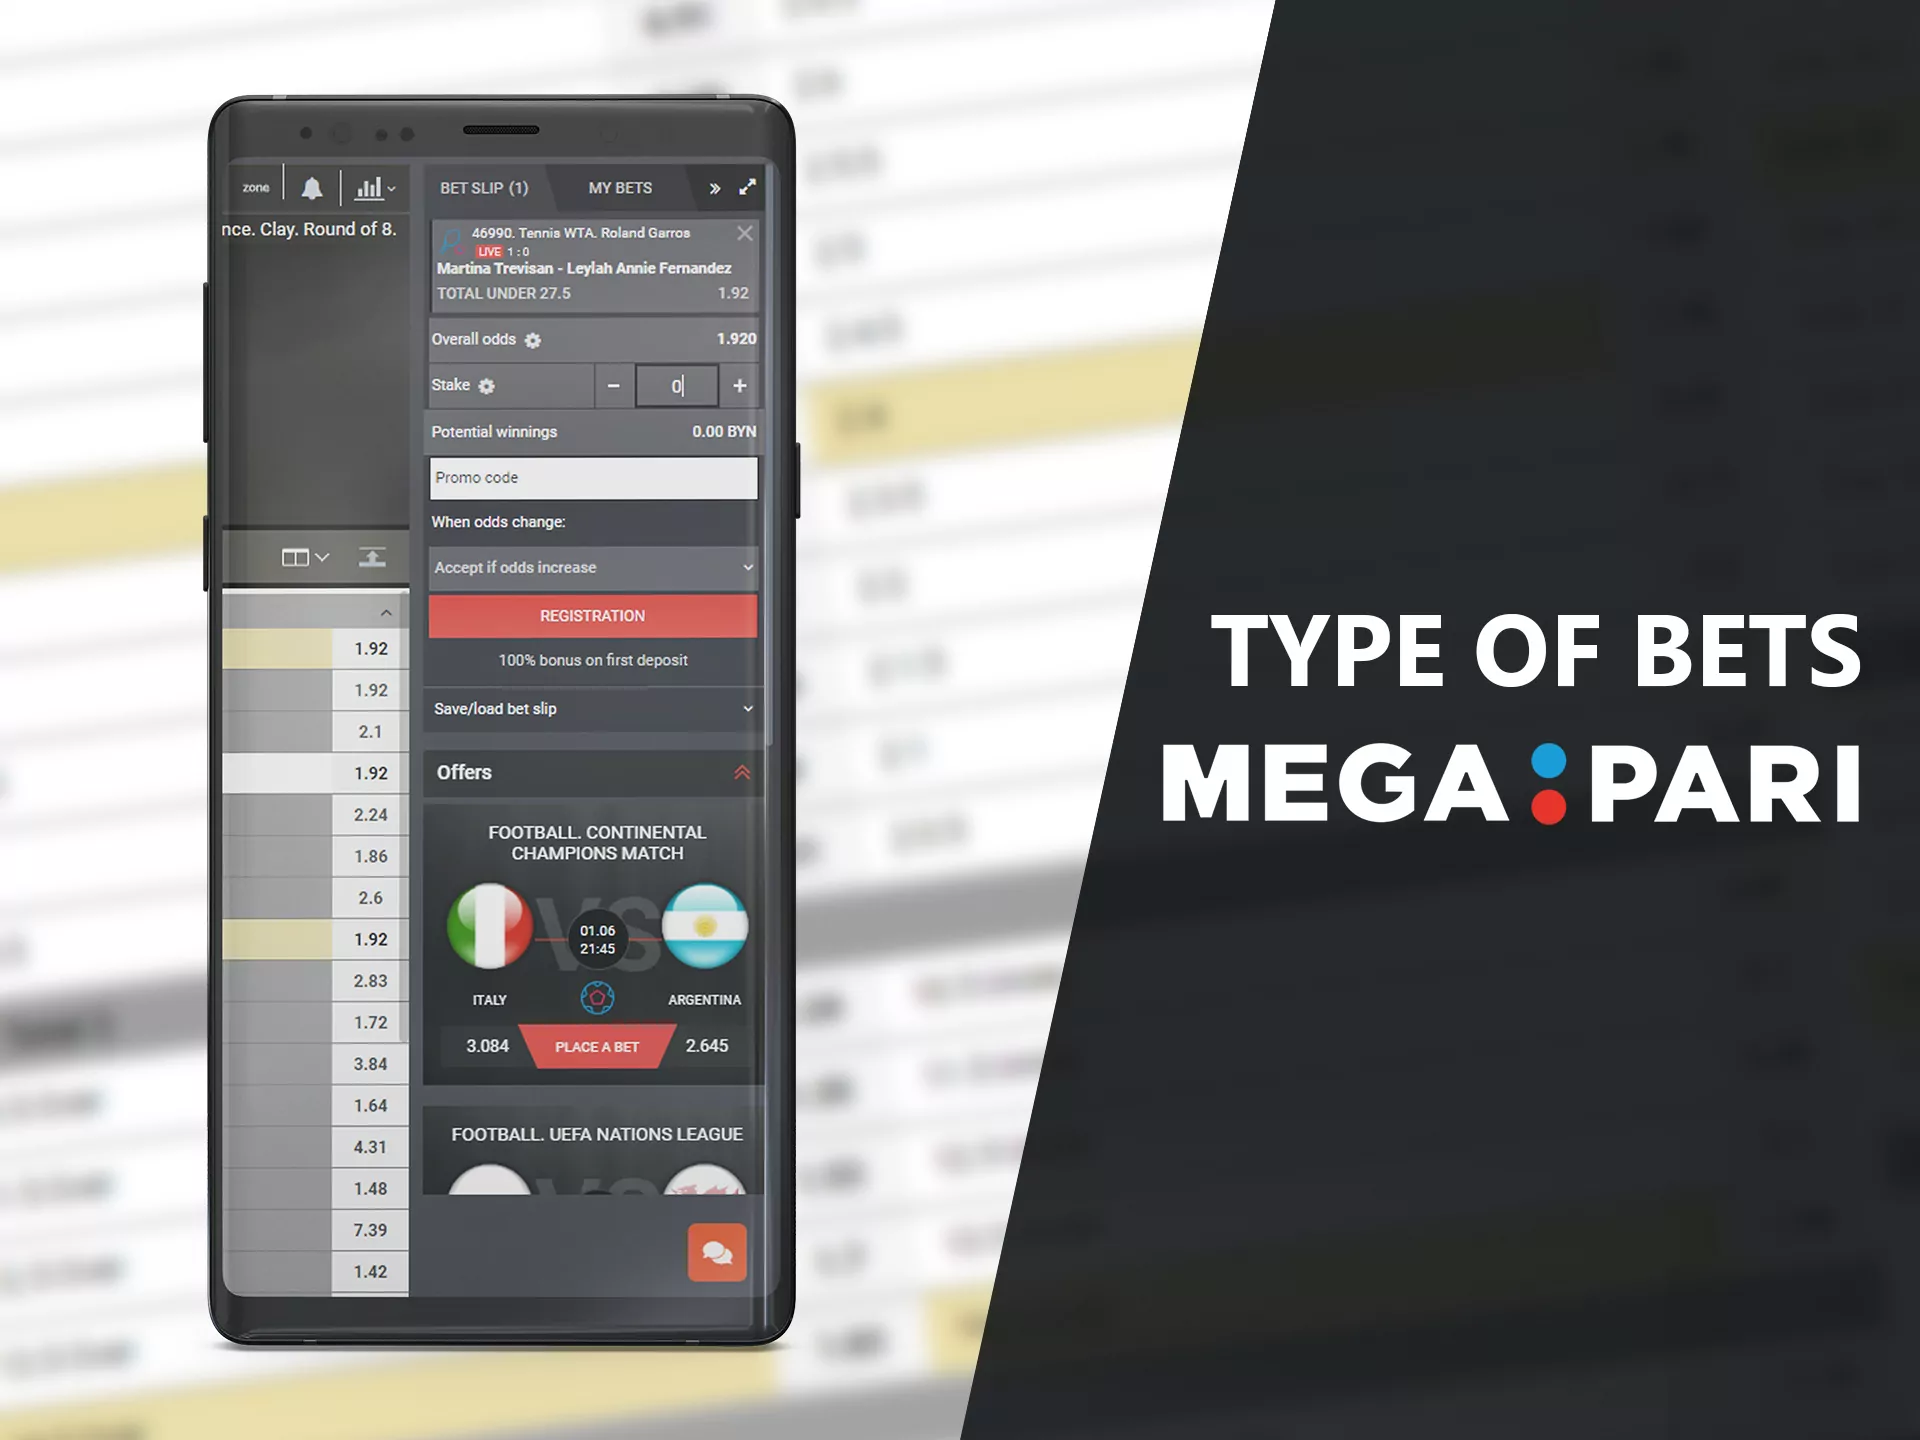 Place different types of bets in the Megapari app.